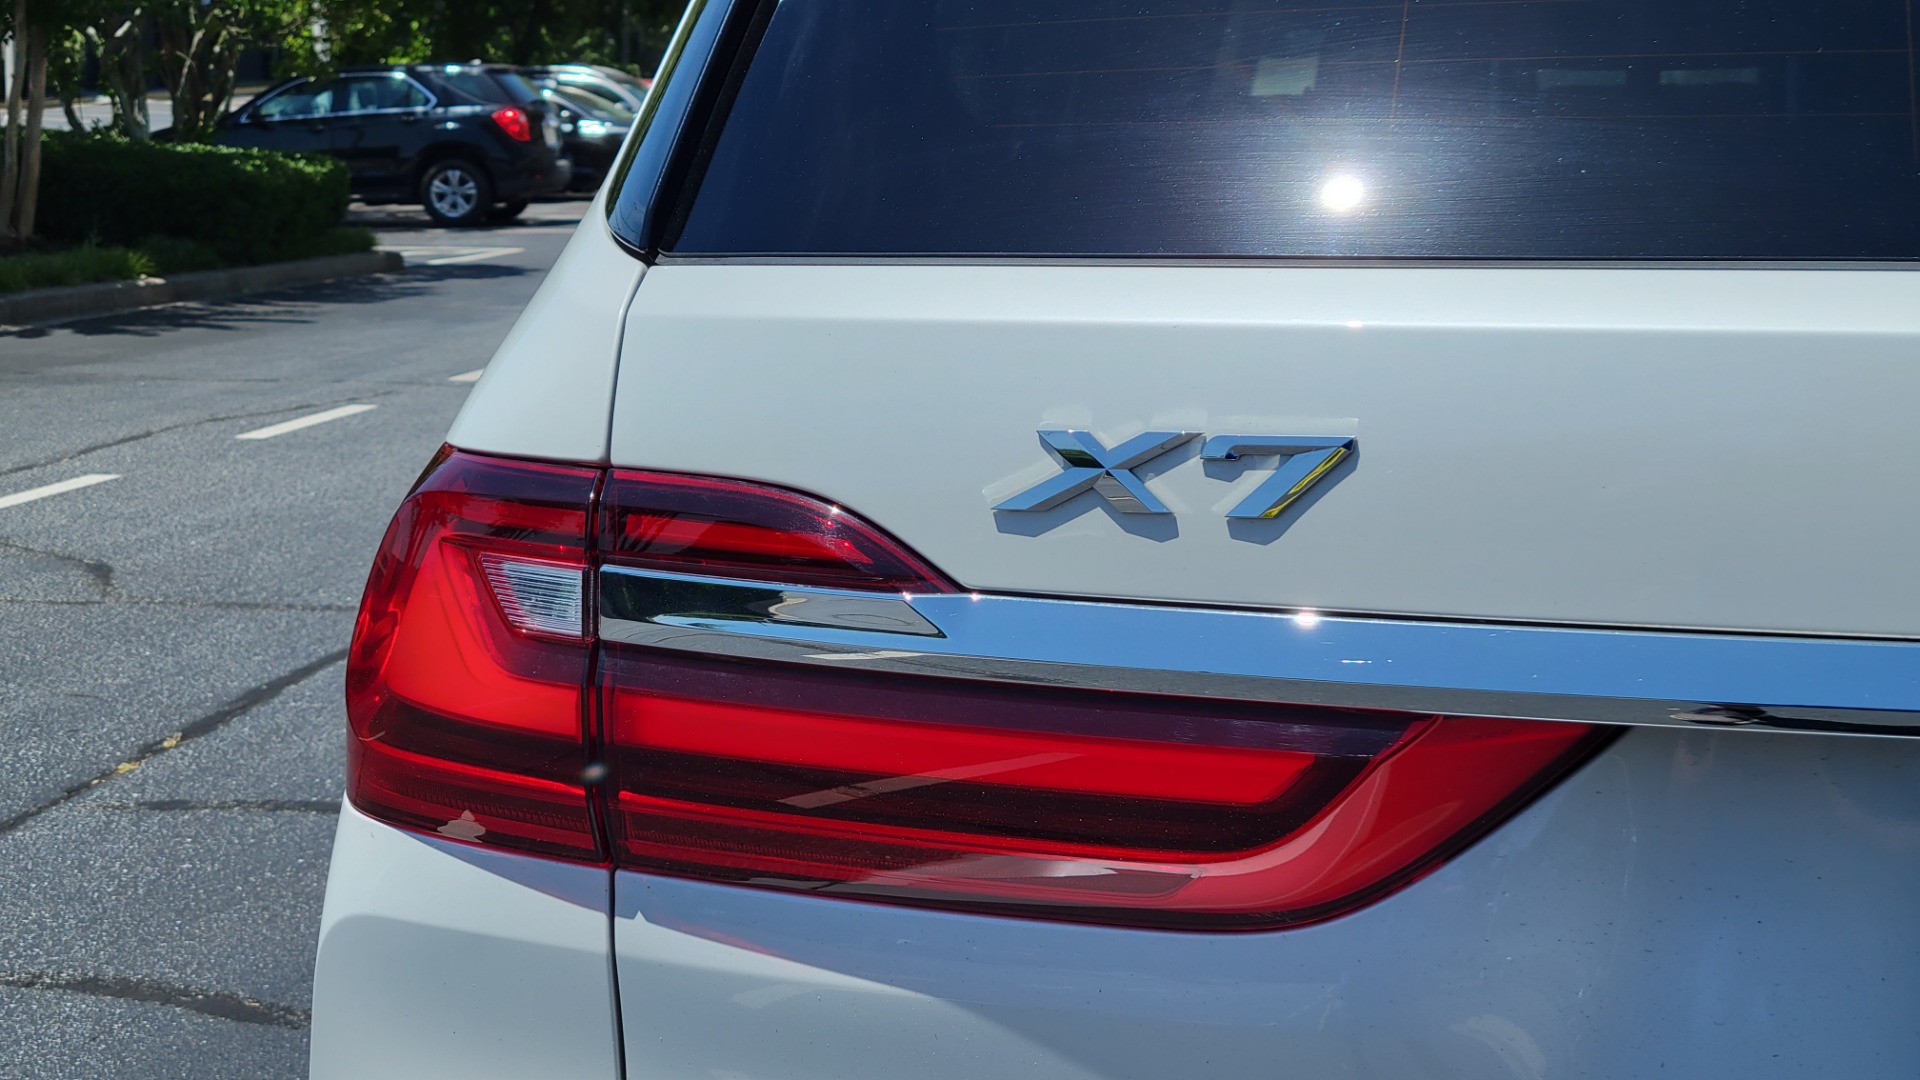 Used 2019 BMW X7 XDRIVE40I PREMIUM / NAV / HUD / PARK ASST PLUS / REMOTE START / 3D VIEW for sale $68,995 at Formula Imports in Charlotte NC 28227 40